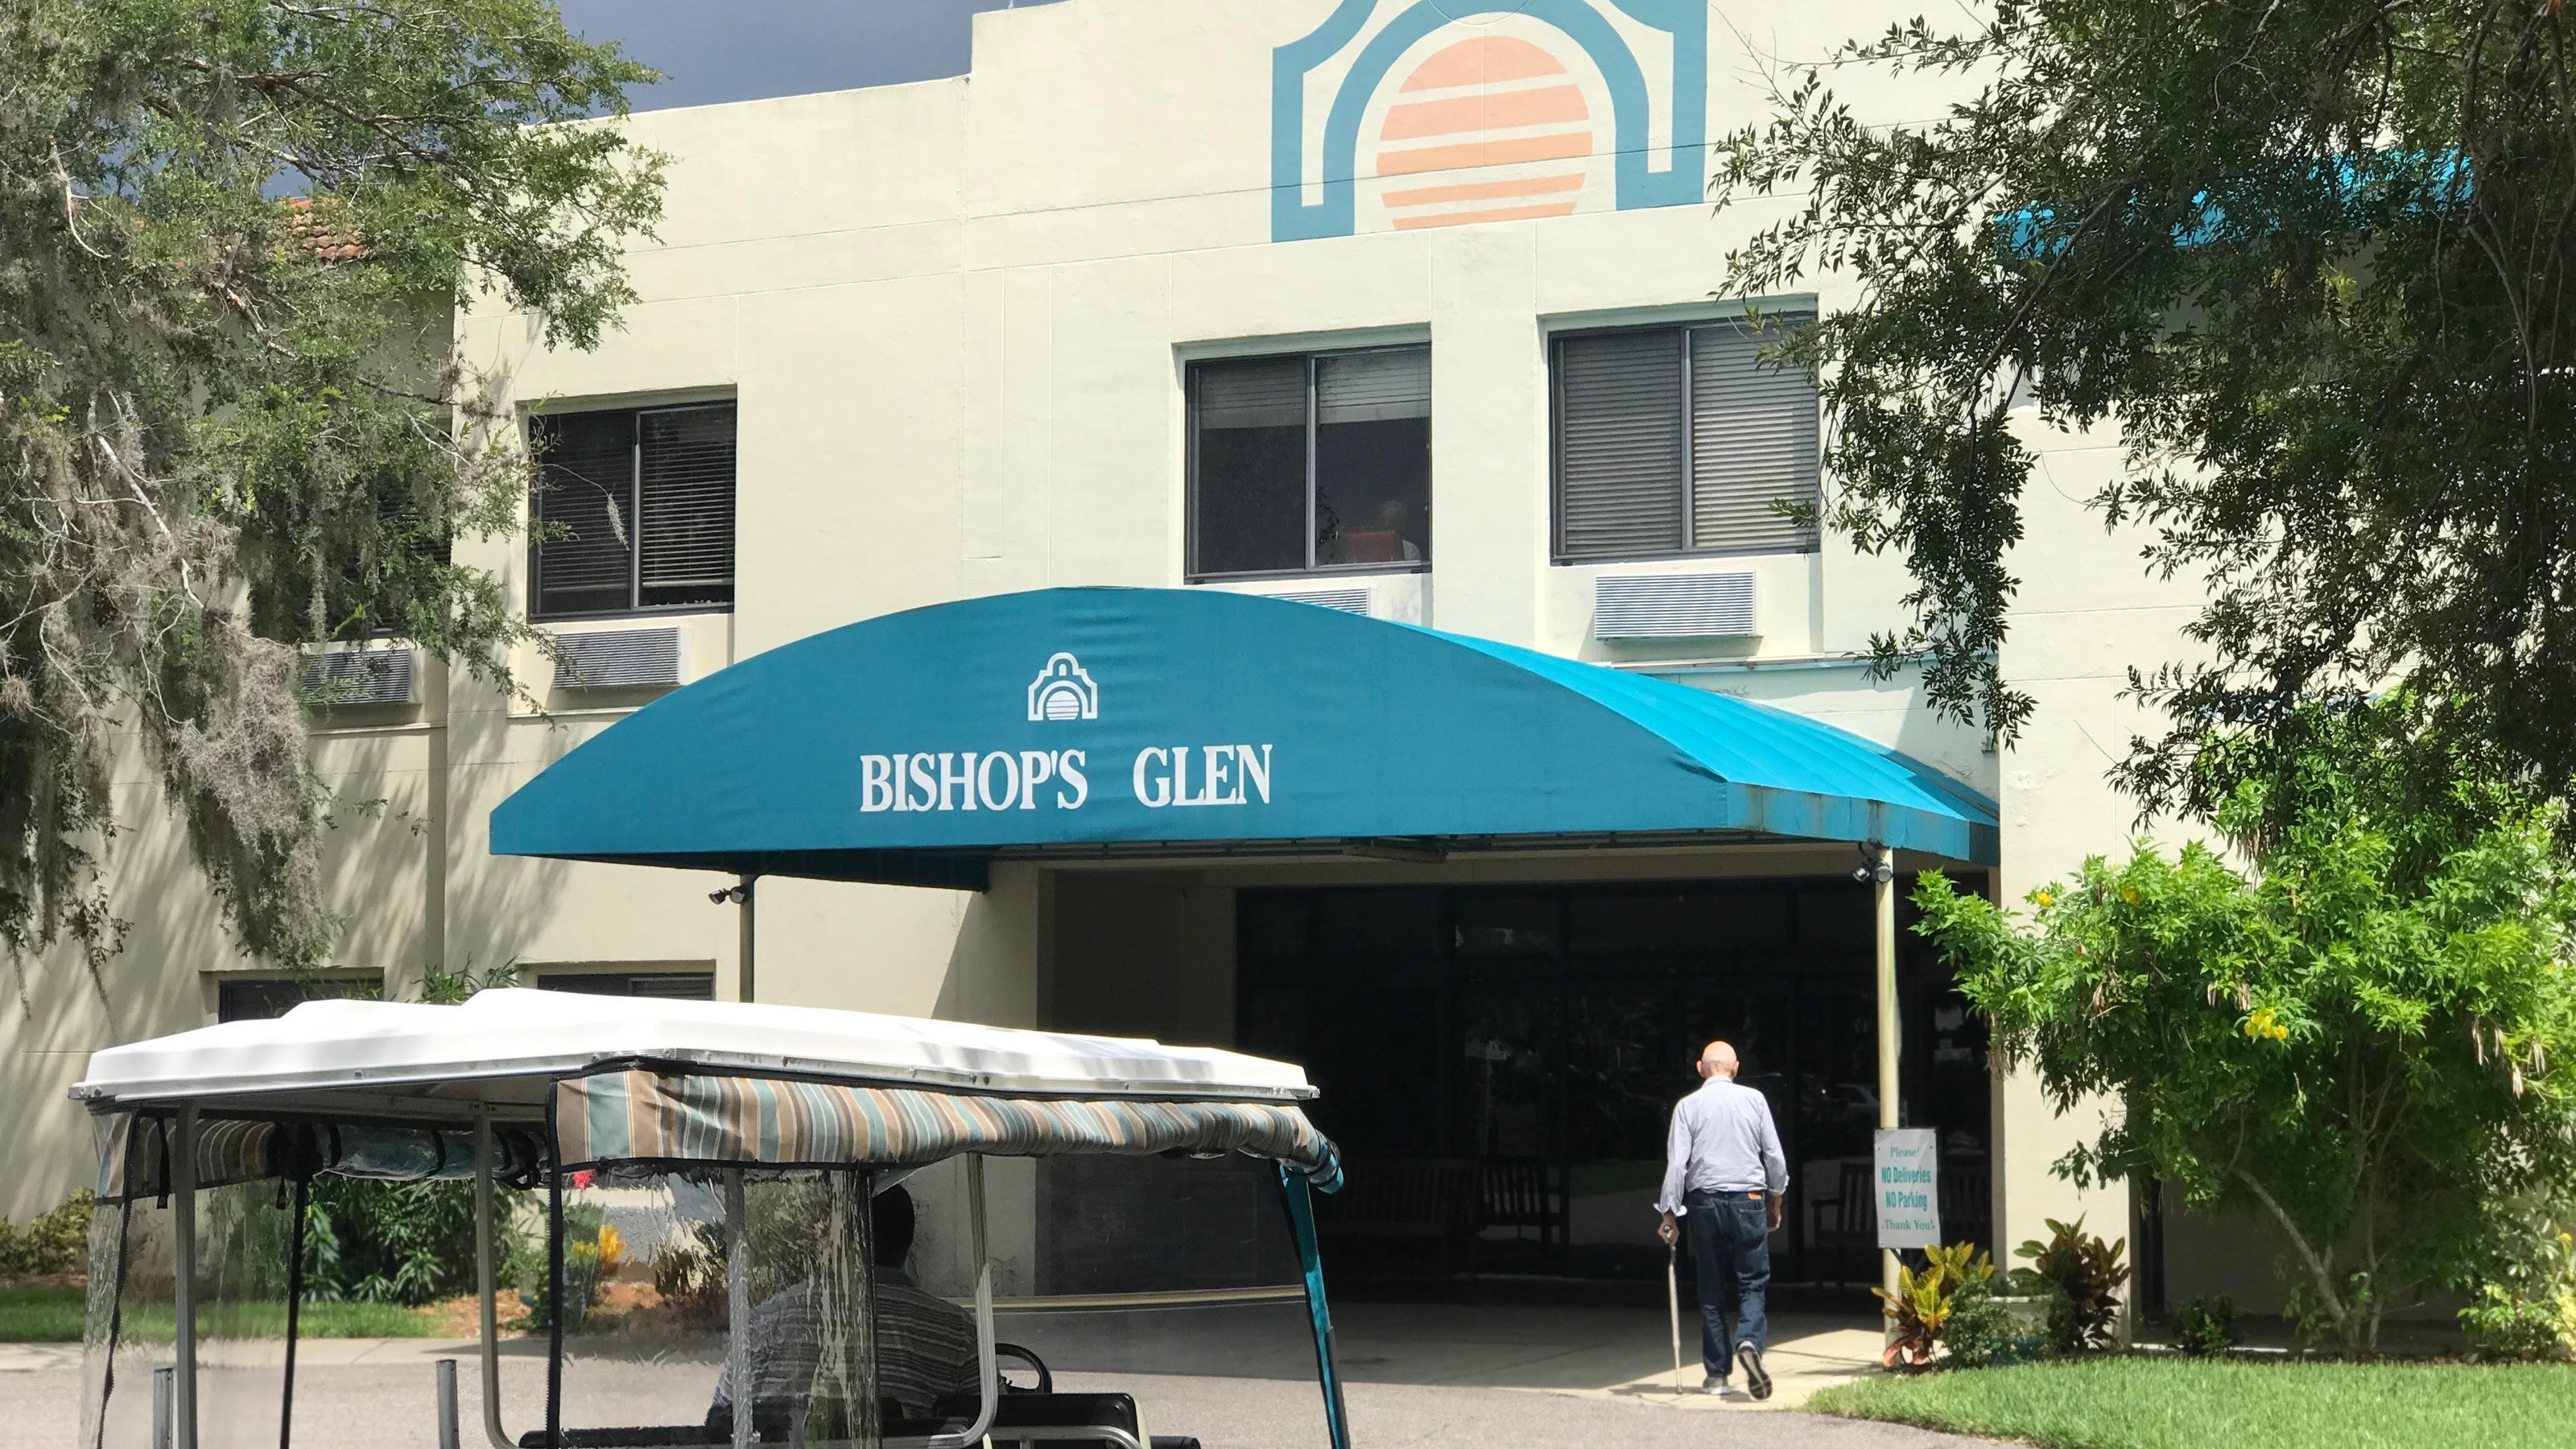 Bishop's Glen facing two wrongful death suits, 3 negligence suits